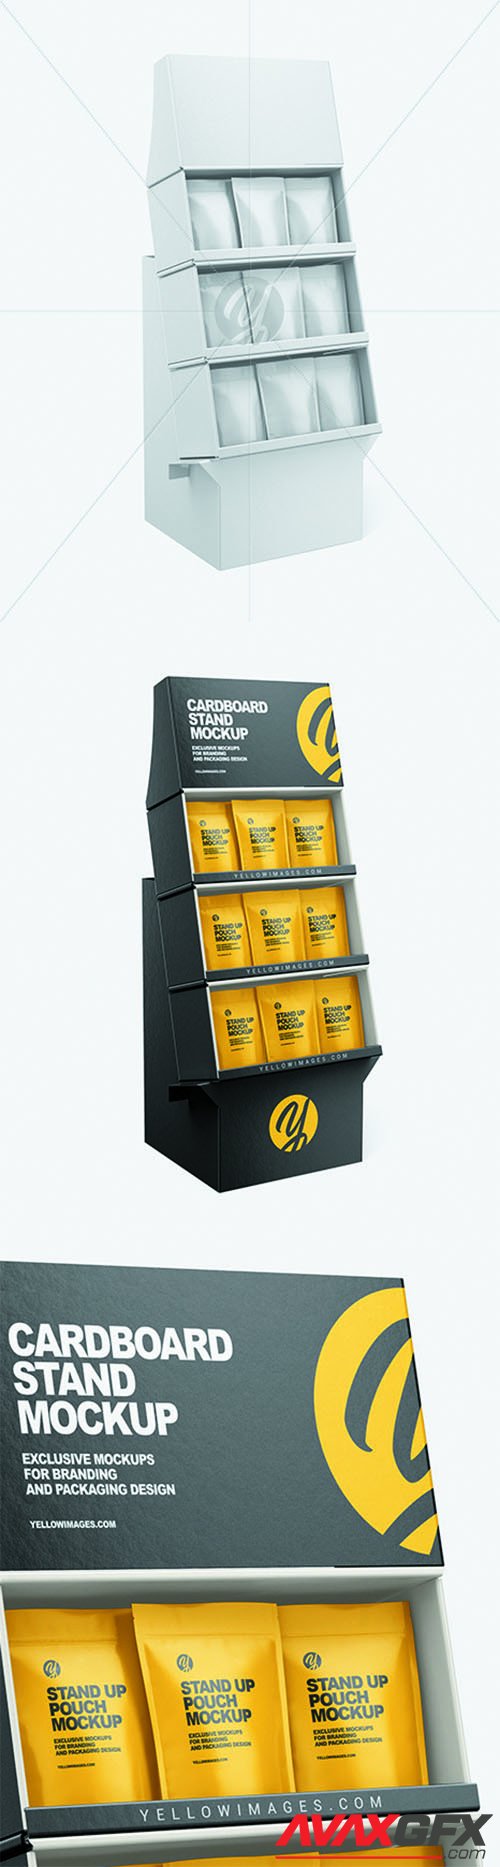 Cardboard Display Stand w/ Pouches Mockup 68736